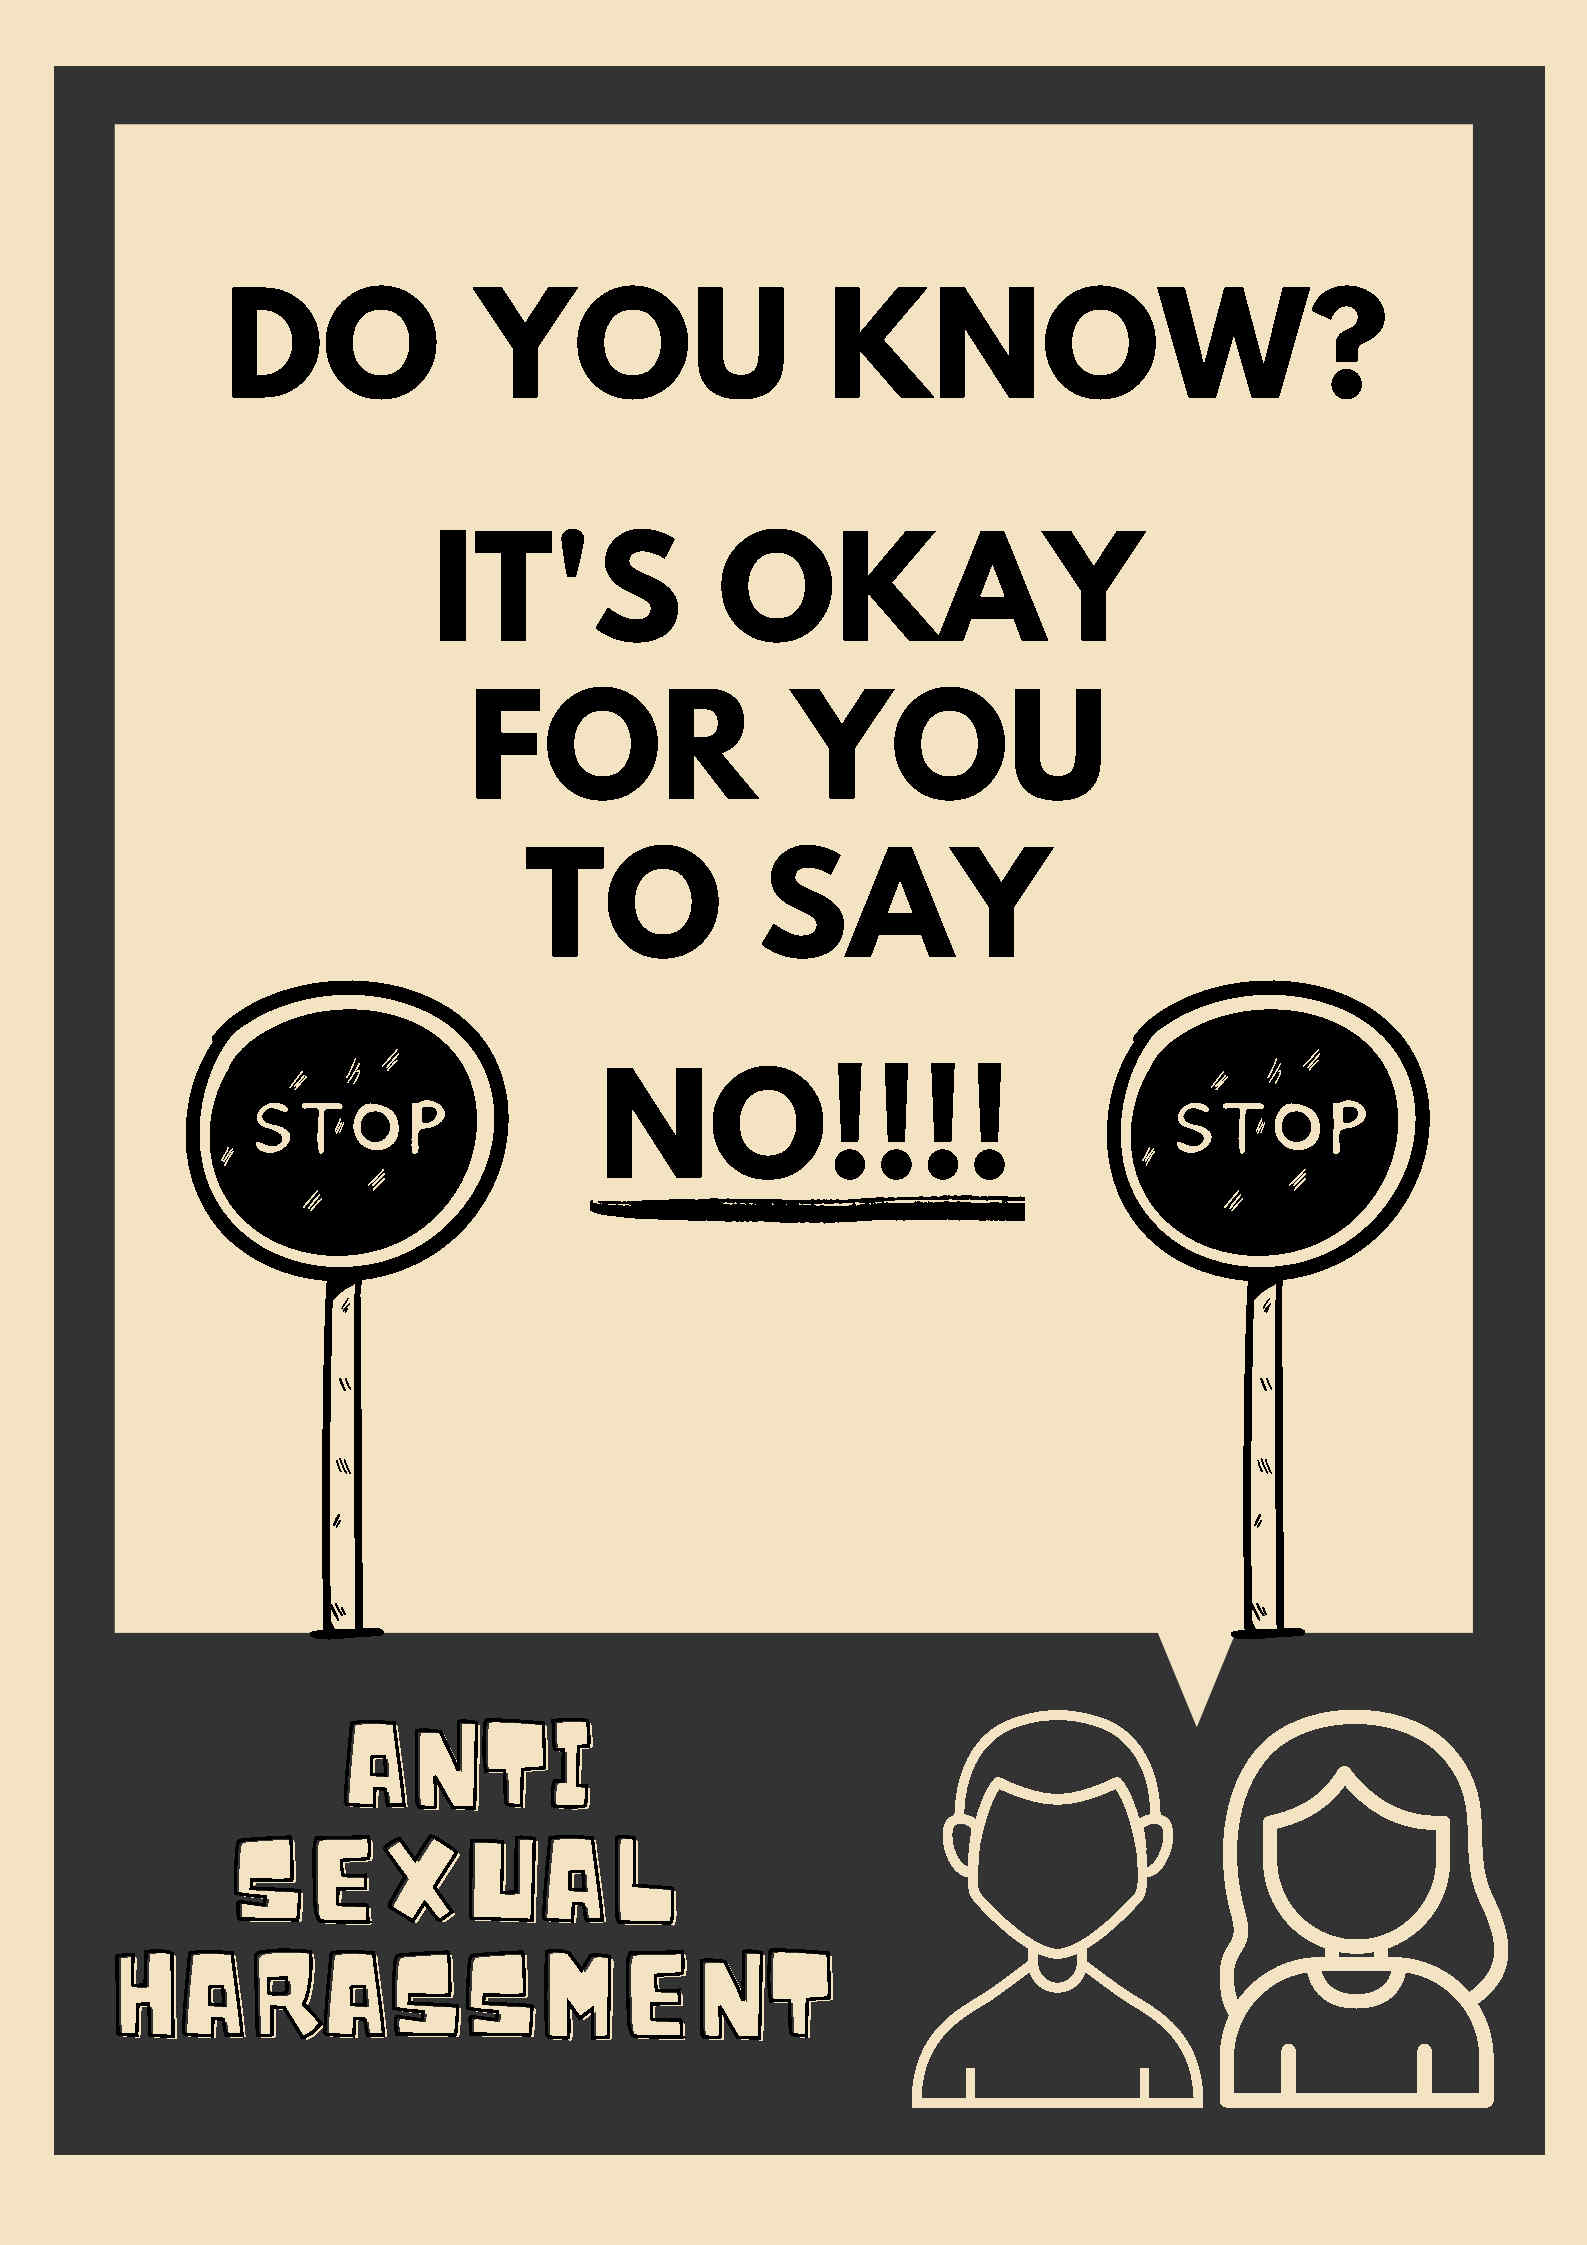 2nd Runner-up: Chung Ping Yu (Its okay for you to say no) Sexual harssment is a big challenge. When harssment happens, sometimes victims do not have the courage to stop the unwelcome behaviour. This poster hopes to send a message to remind all of us that: at any time in any place, it is okay for you to say no.